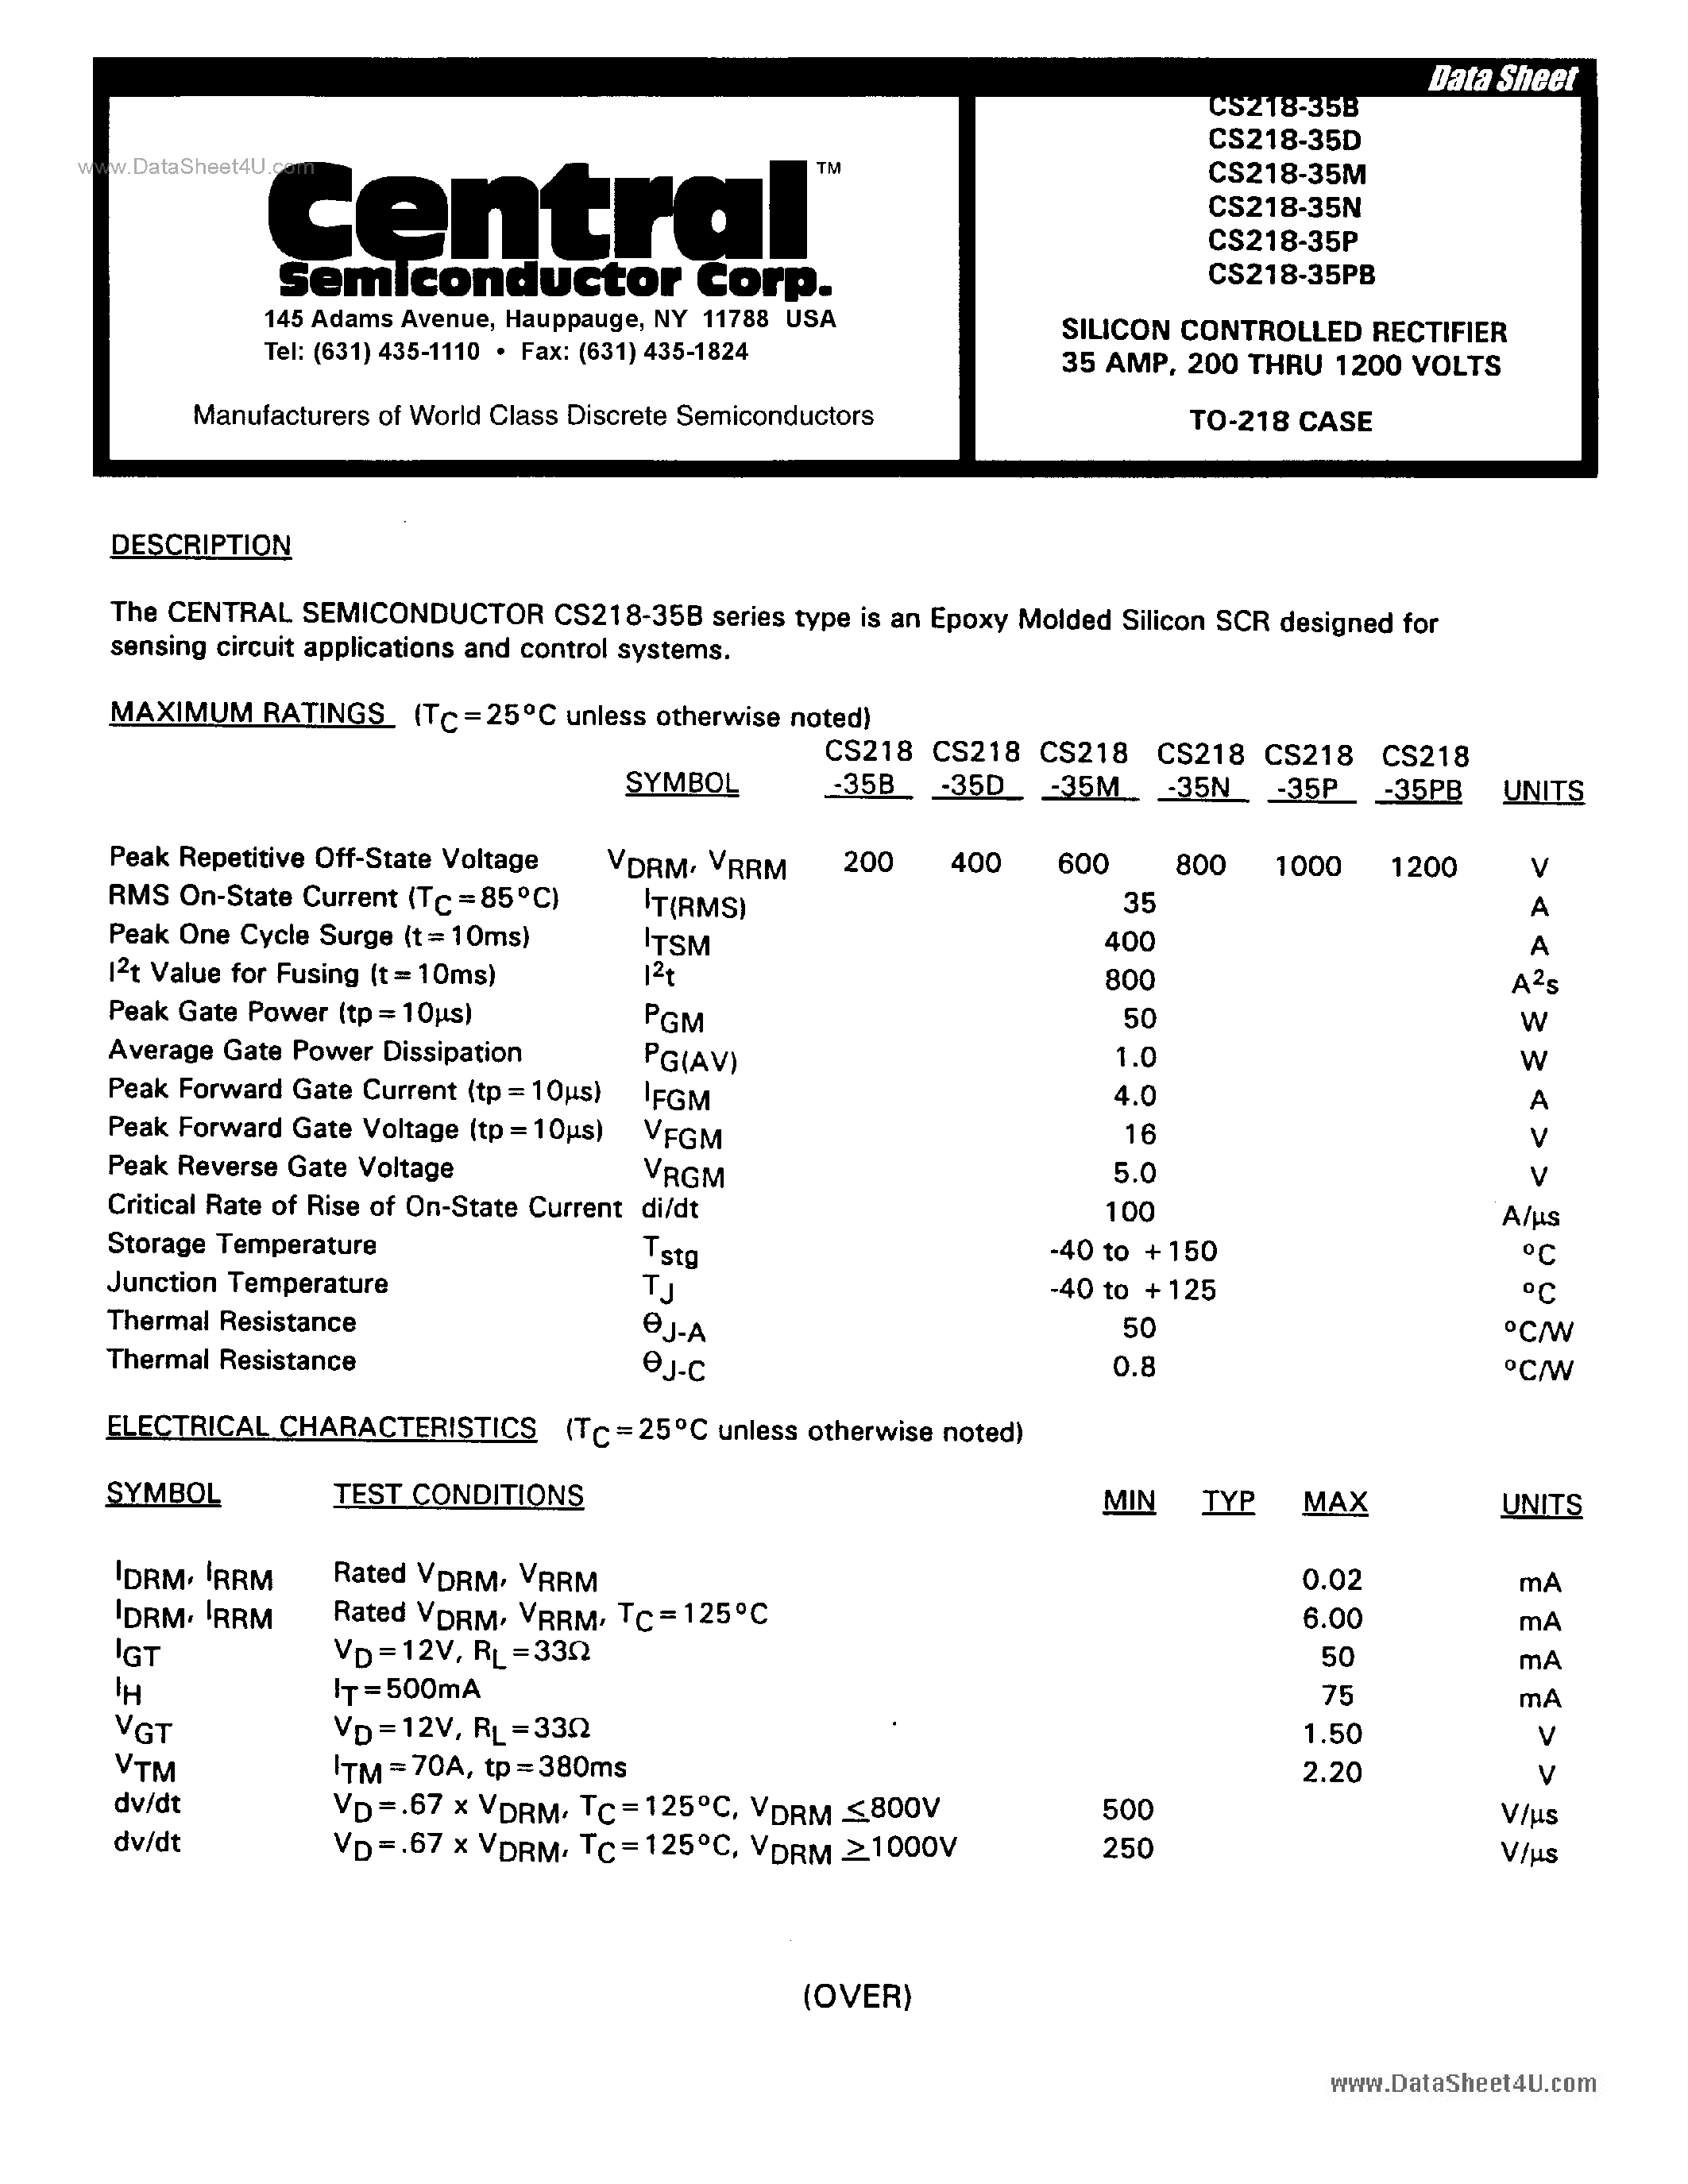 Datasheet CS218-35x - SILICON CONTROLLED RECTIFIER page 1